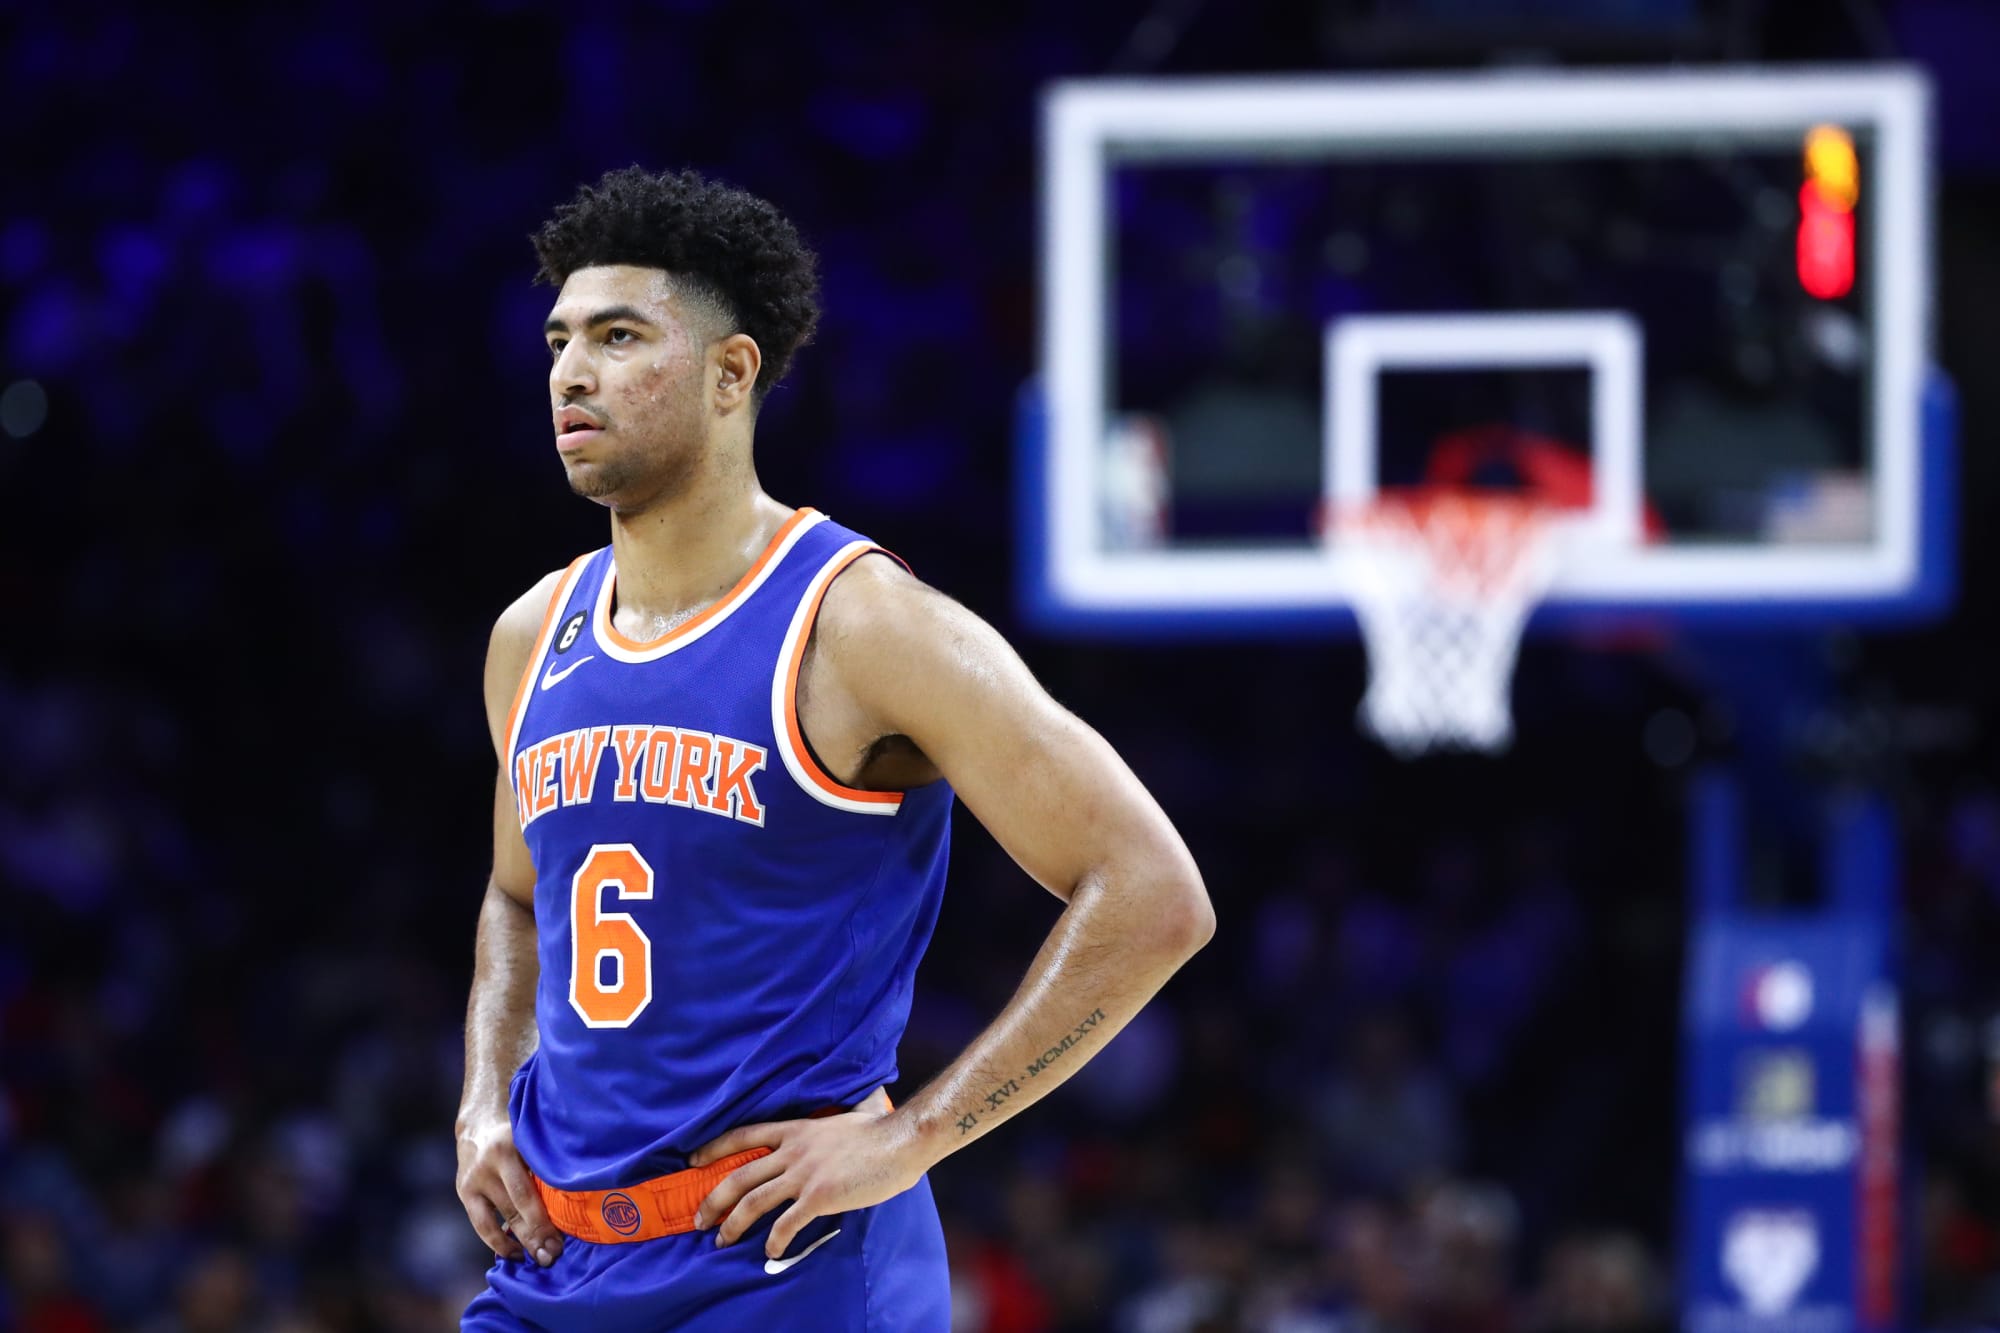 Quentin Grimes White New York Knicks Game-Used #6 Jersey vs. Minnesota  Timberwolves on December 28 2021